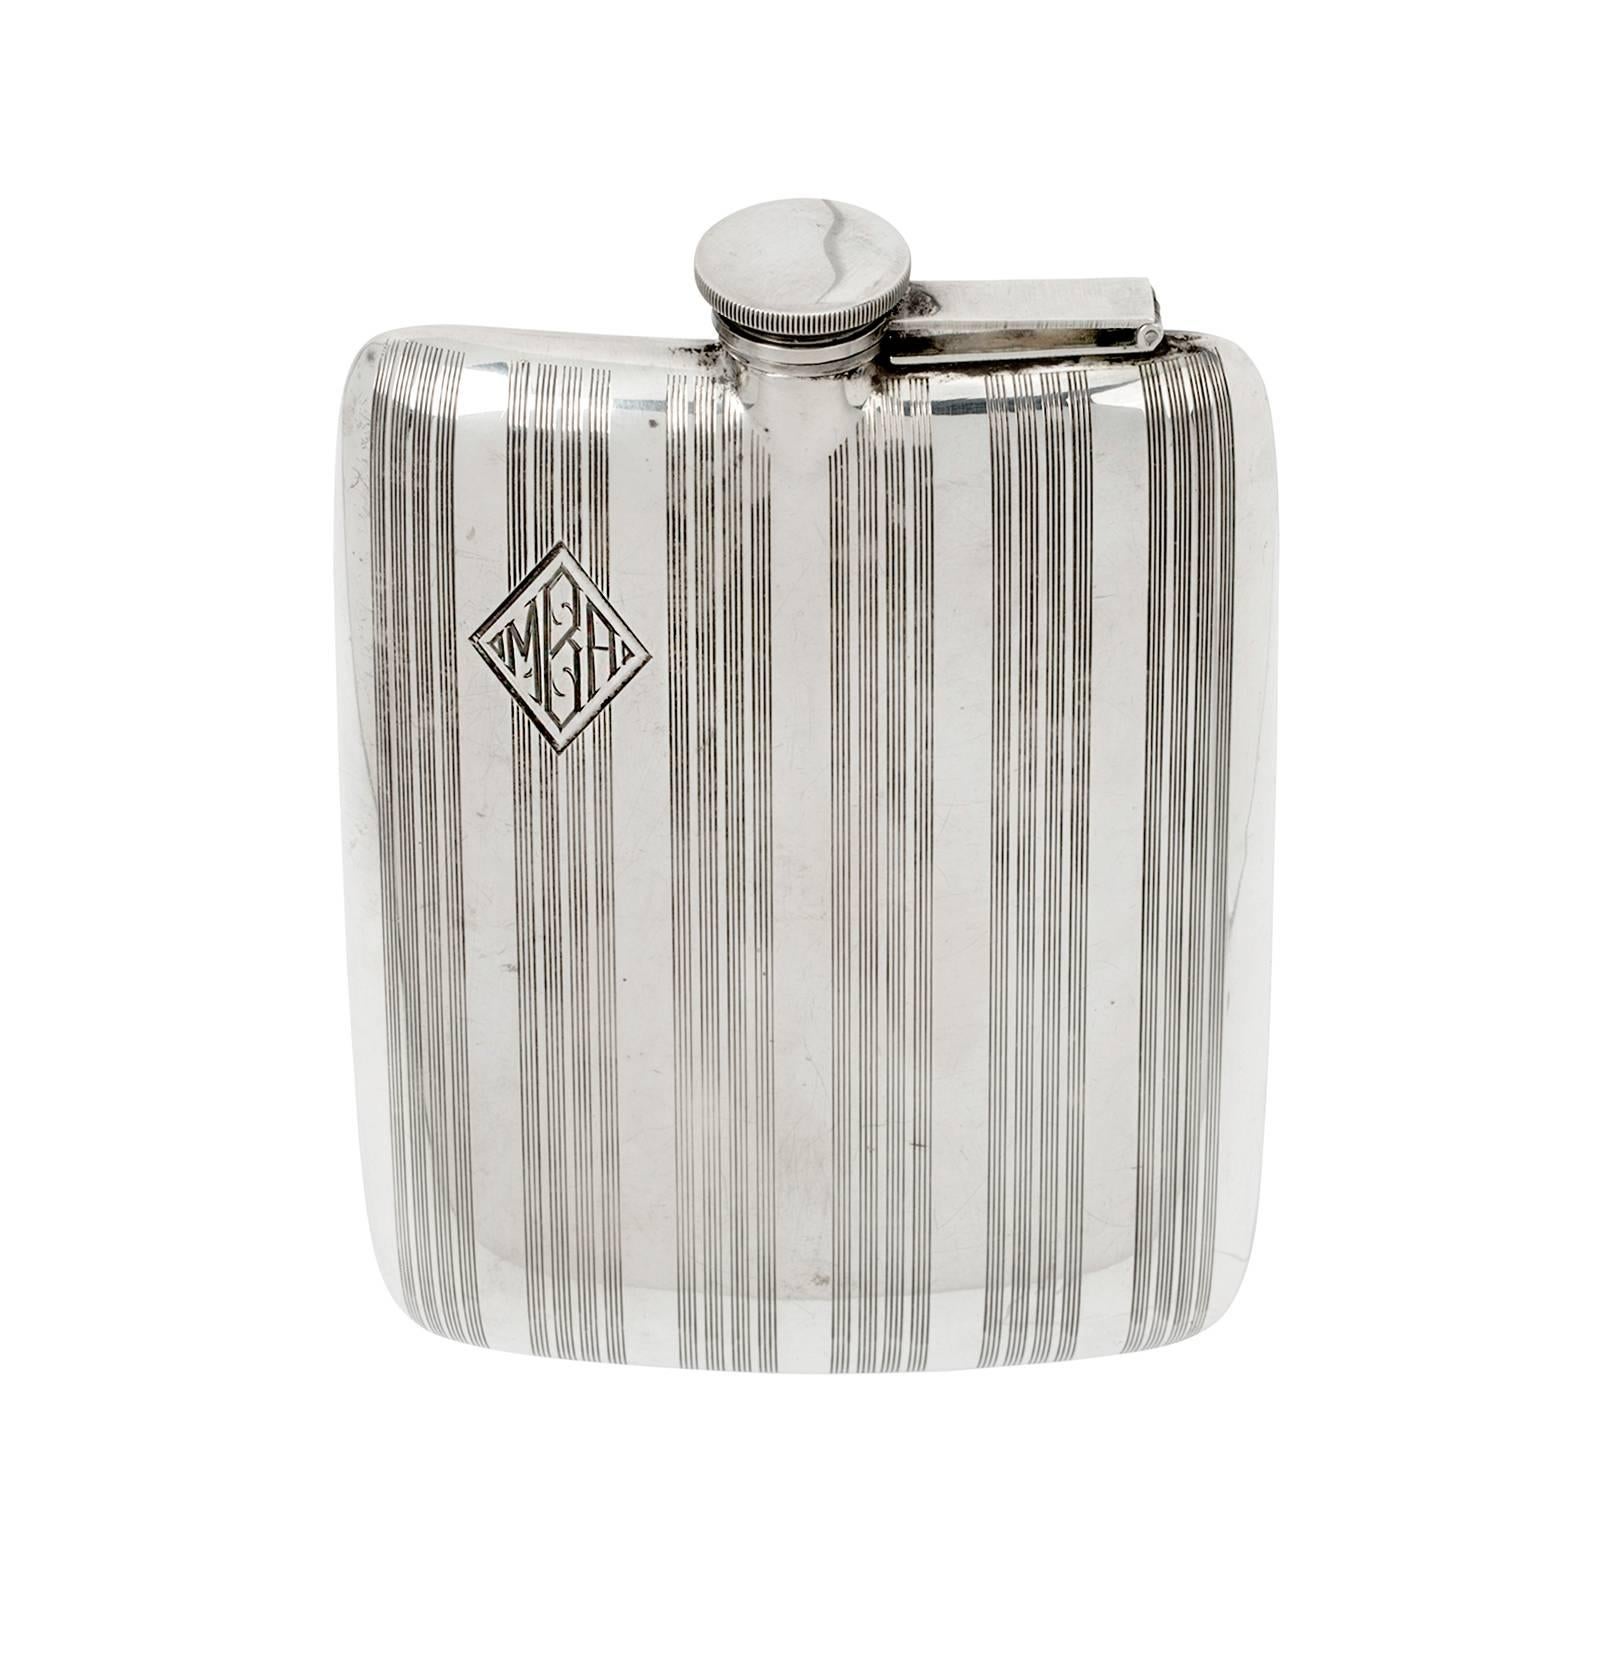 Very handsome rounded rectangular shape sterling silver hip flask. Nice texture designed with etched line stripes. Monogrammed 